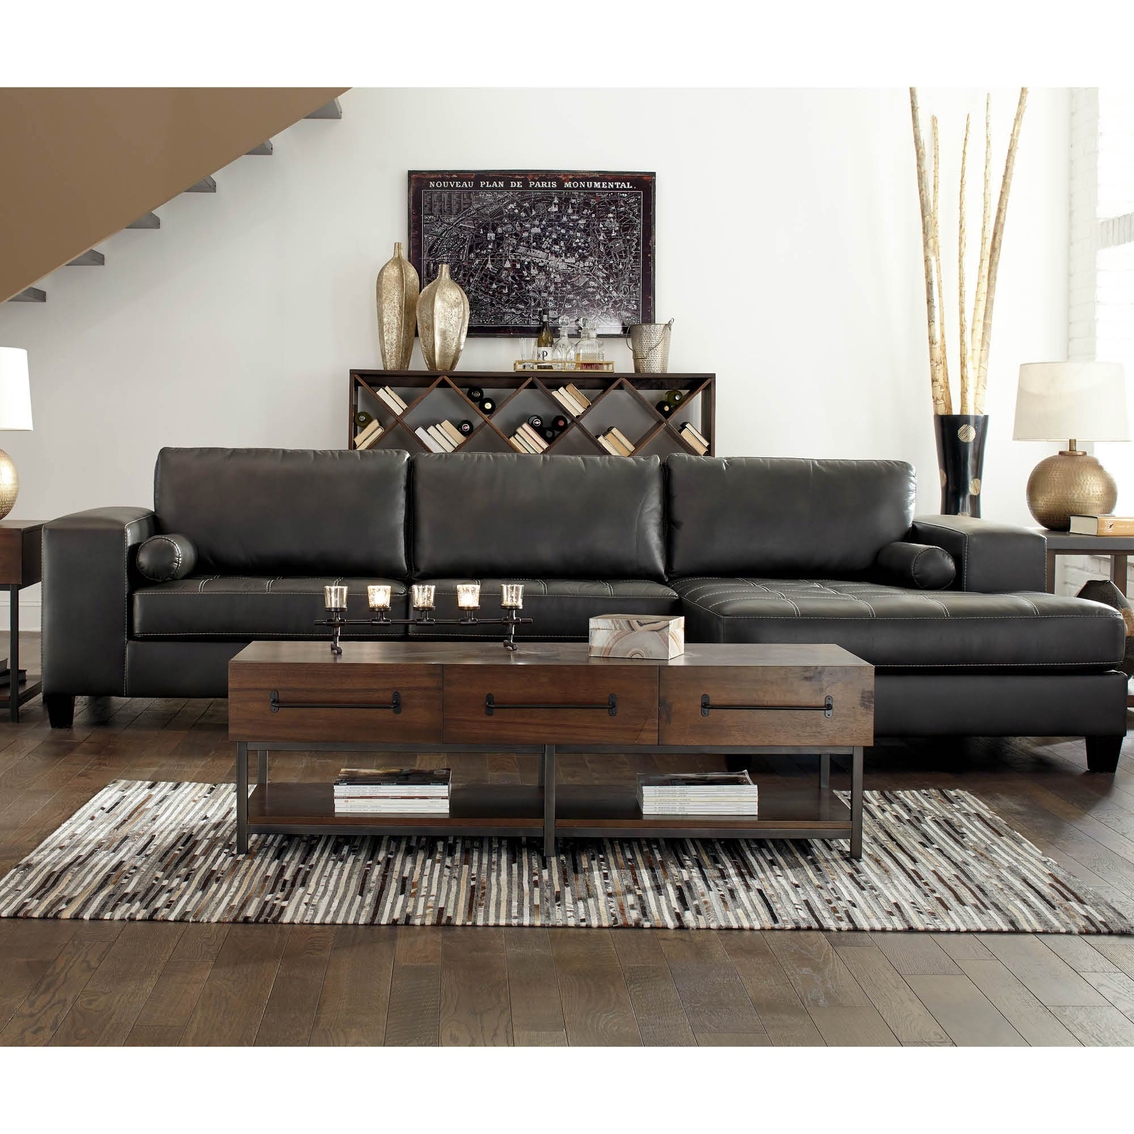 Signature Design by Ashley Nokomis LAF Sofa Sectional with RAF Corner Chaise 2 Pc. - Image 2 of 4